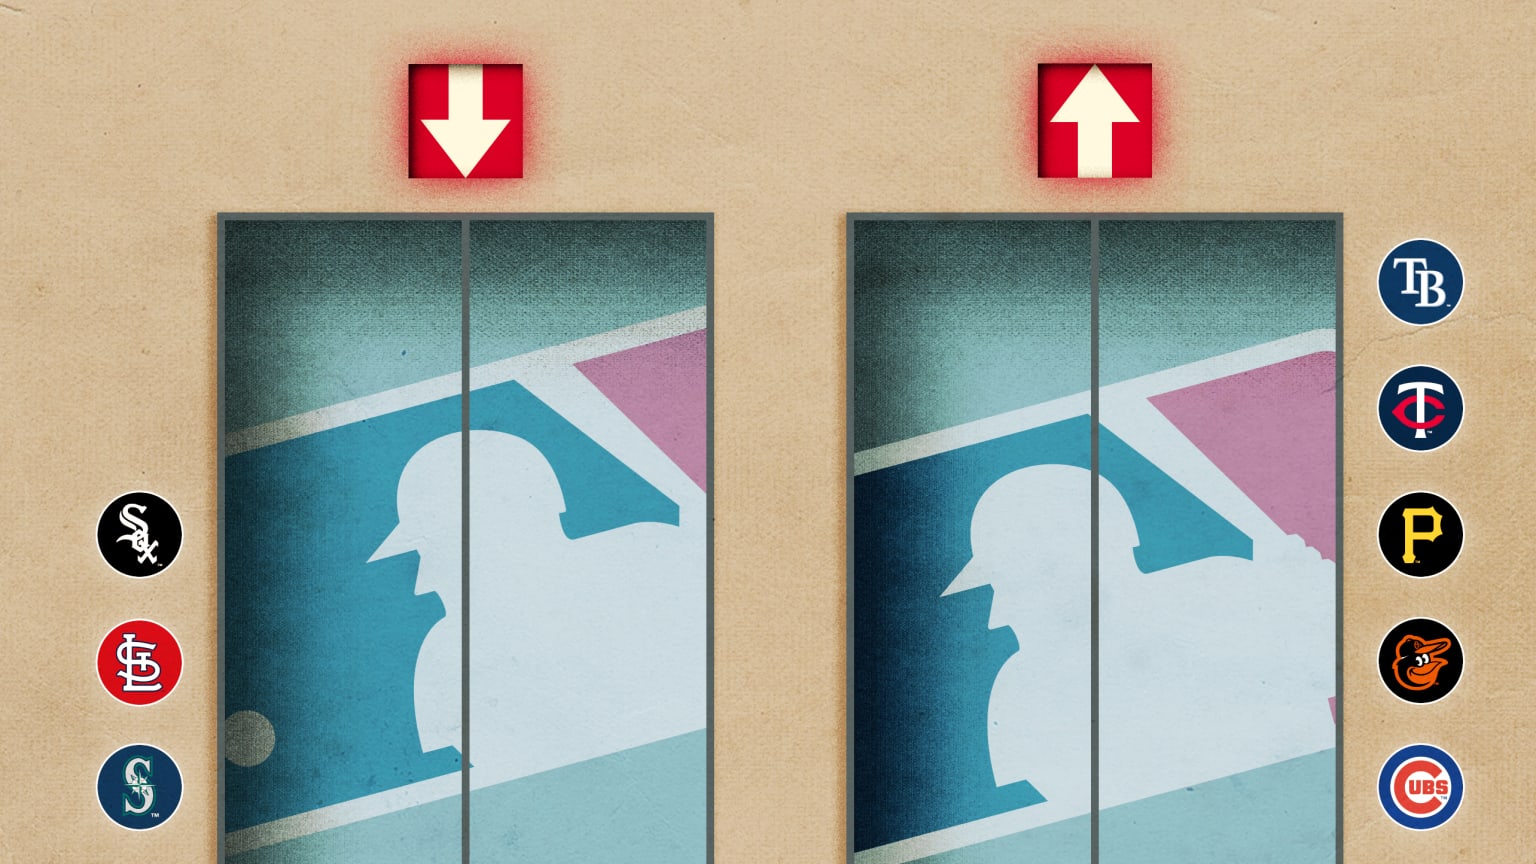 A photo illustration shows a pair of elevator doors with team logos next to them